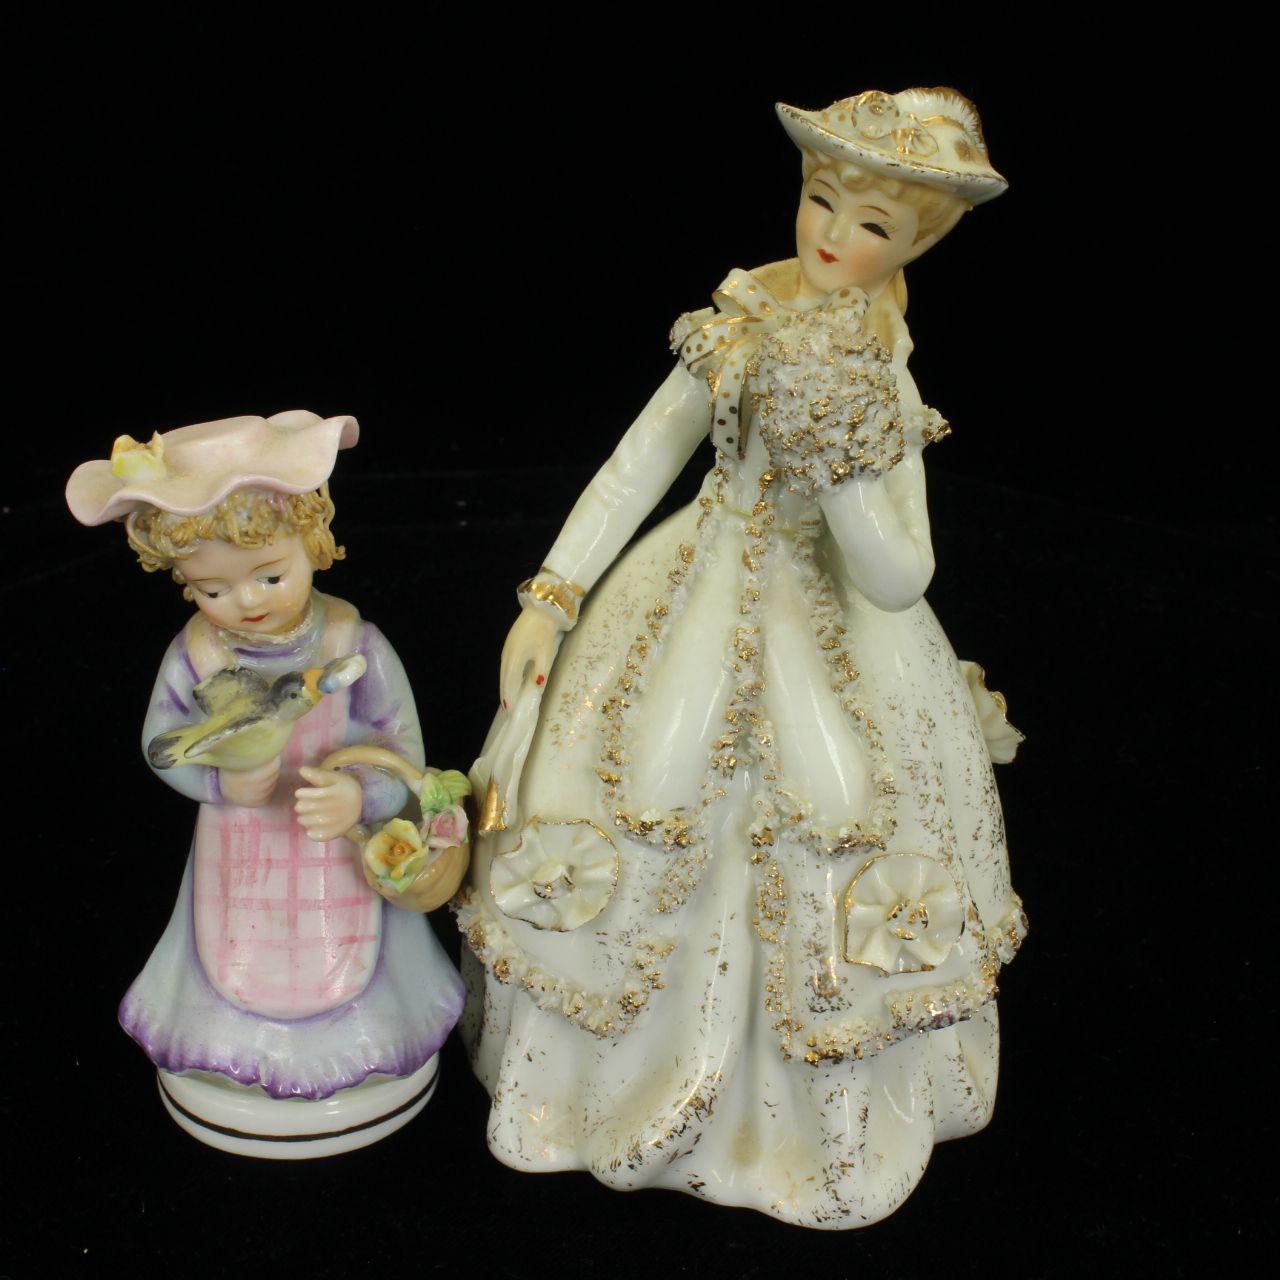 Lot - Lefton Porcelain Figurines, Victorian Lady and Girl